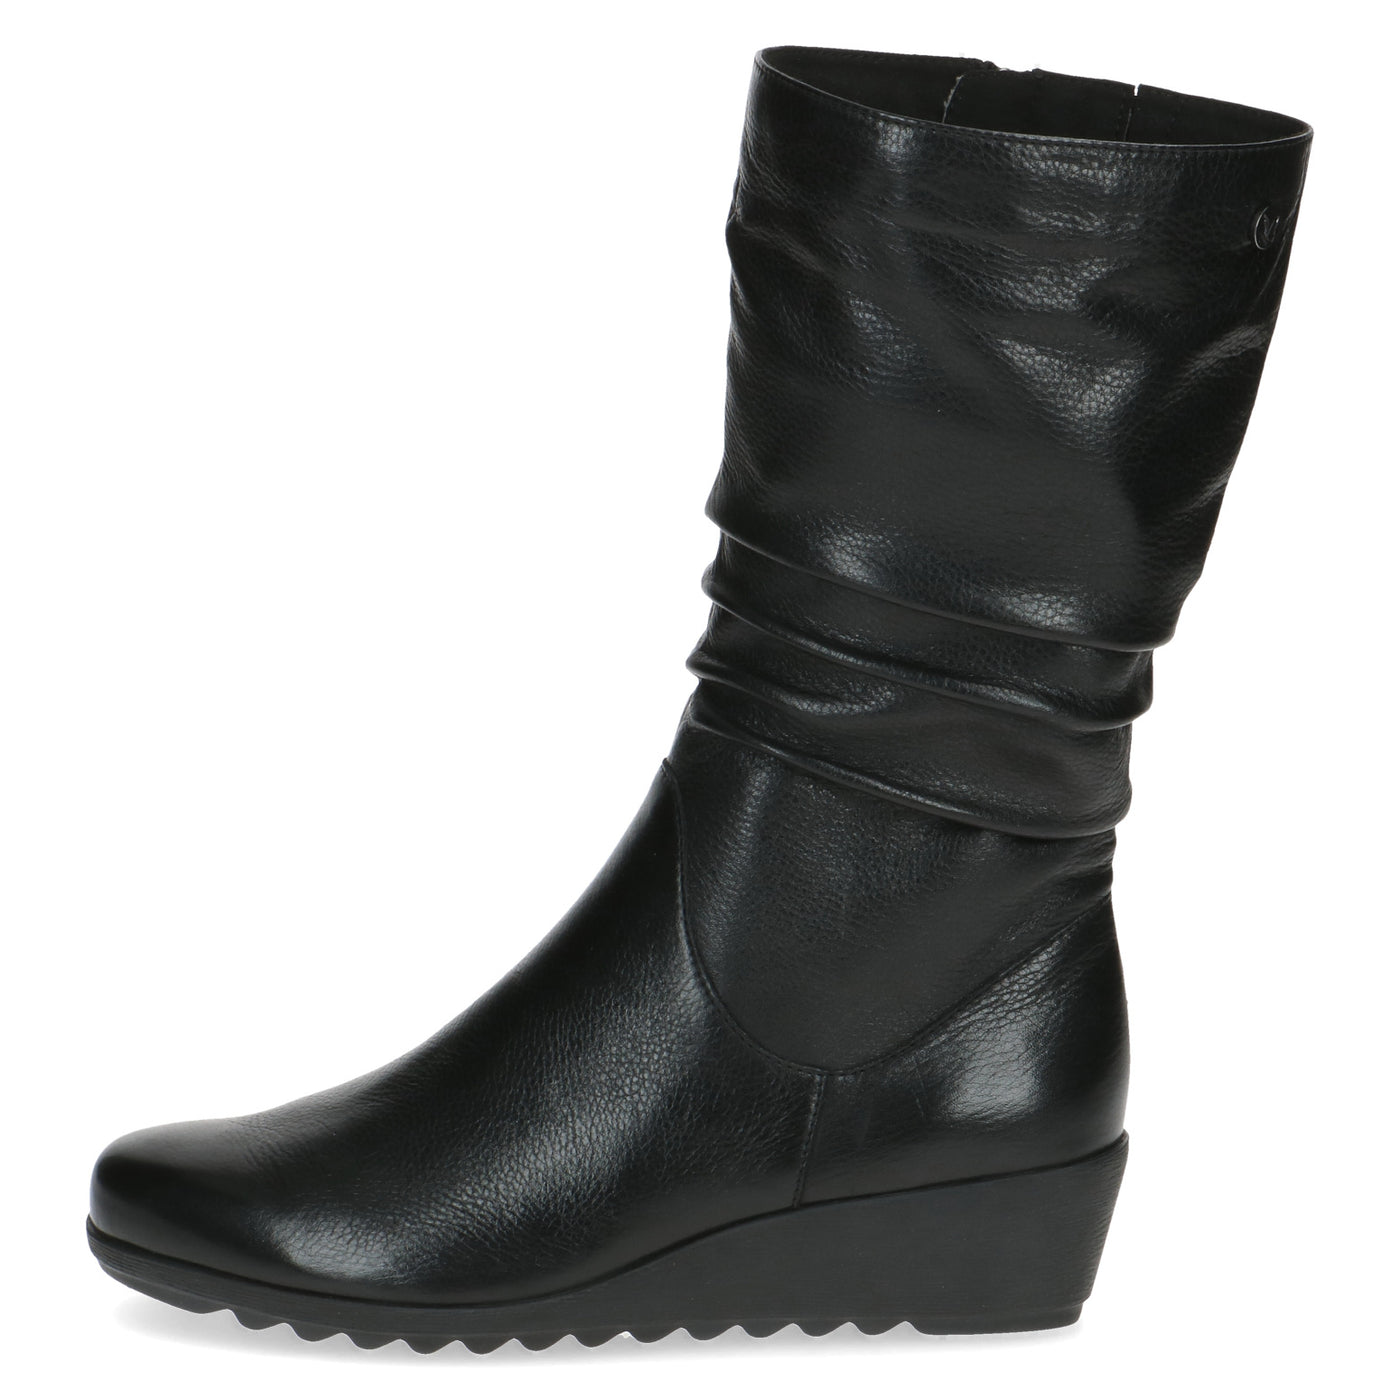 CAPRICE - 25417-022 3/4 LENGTH WEDGE BOOT - BLACK LEATHER